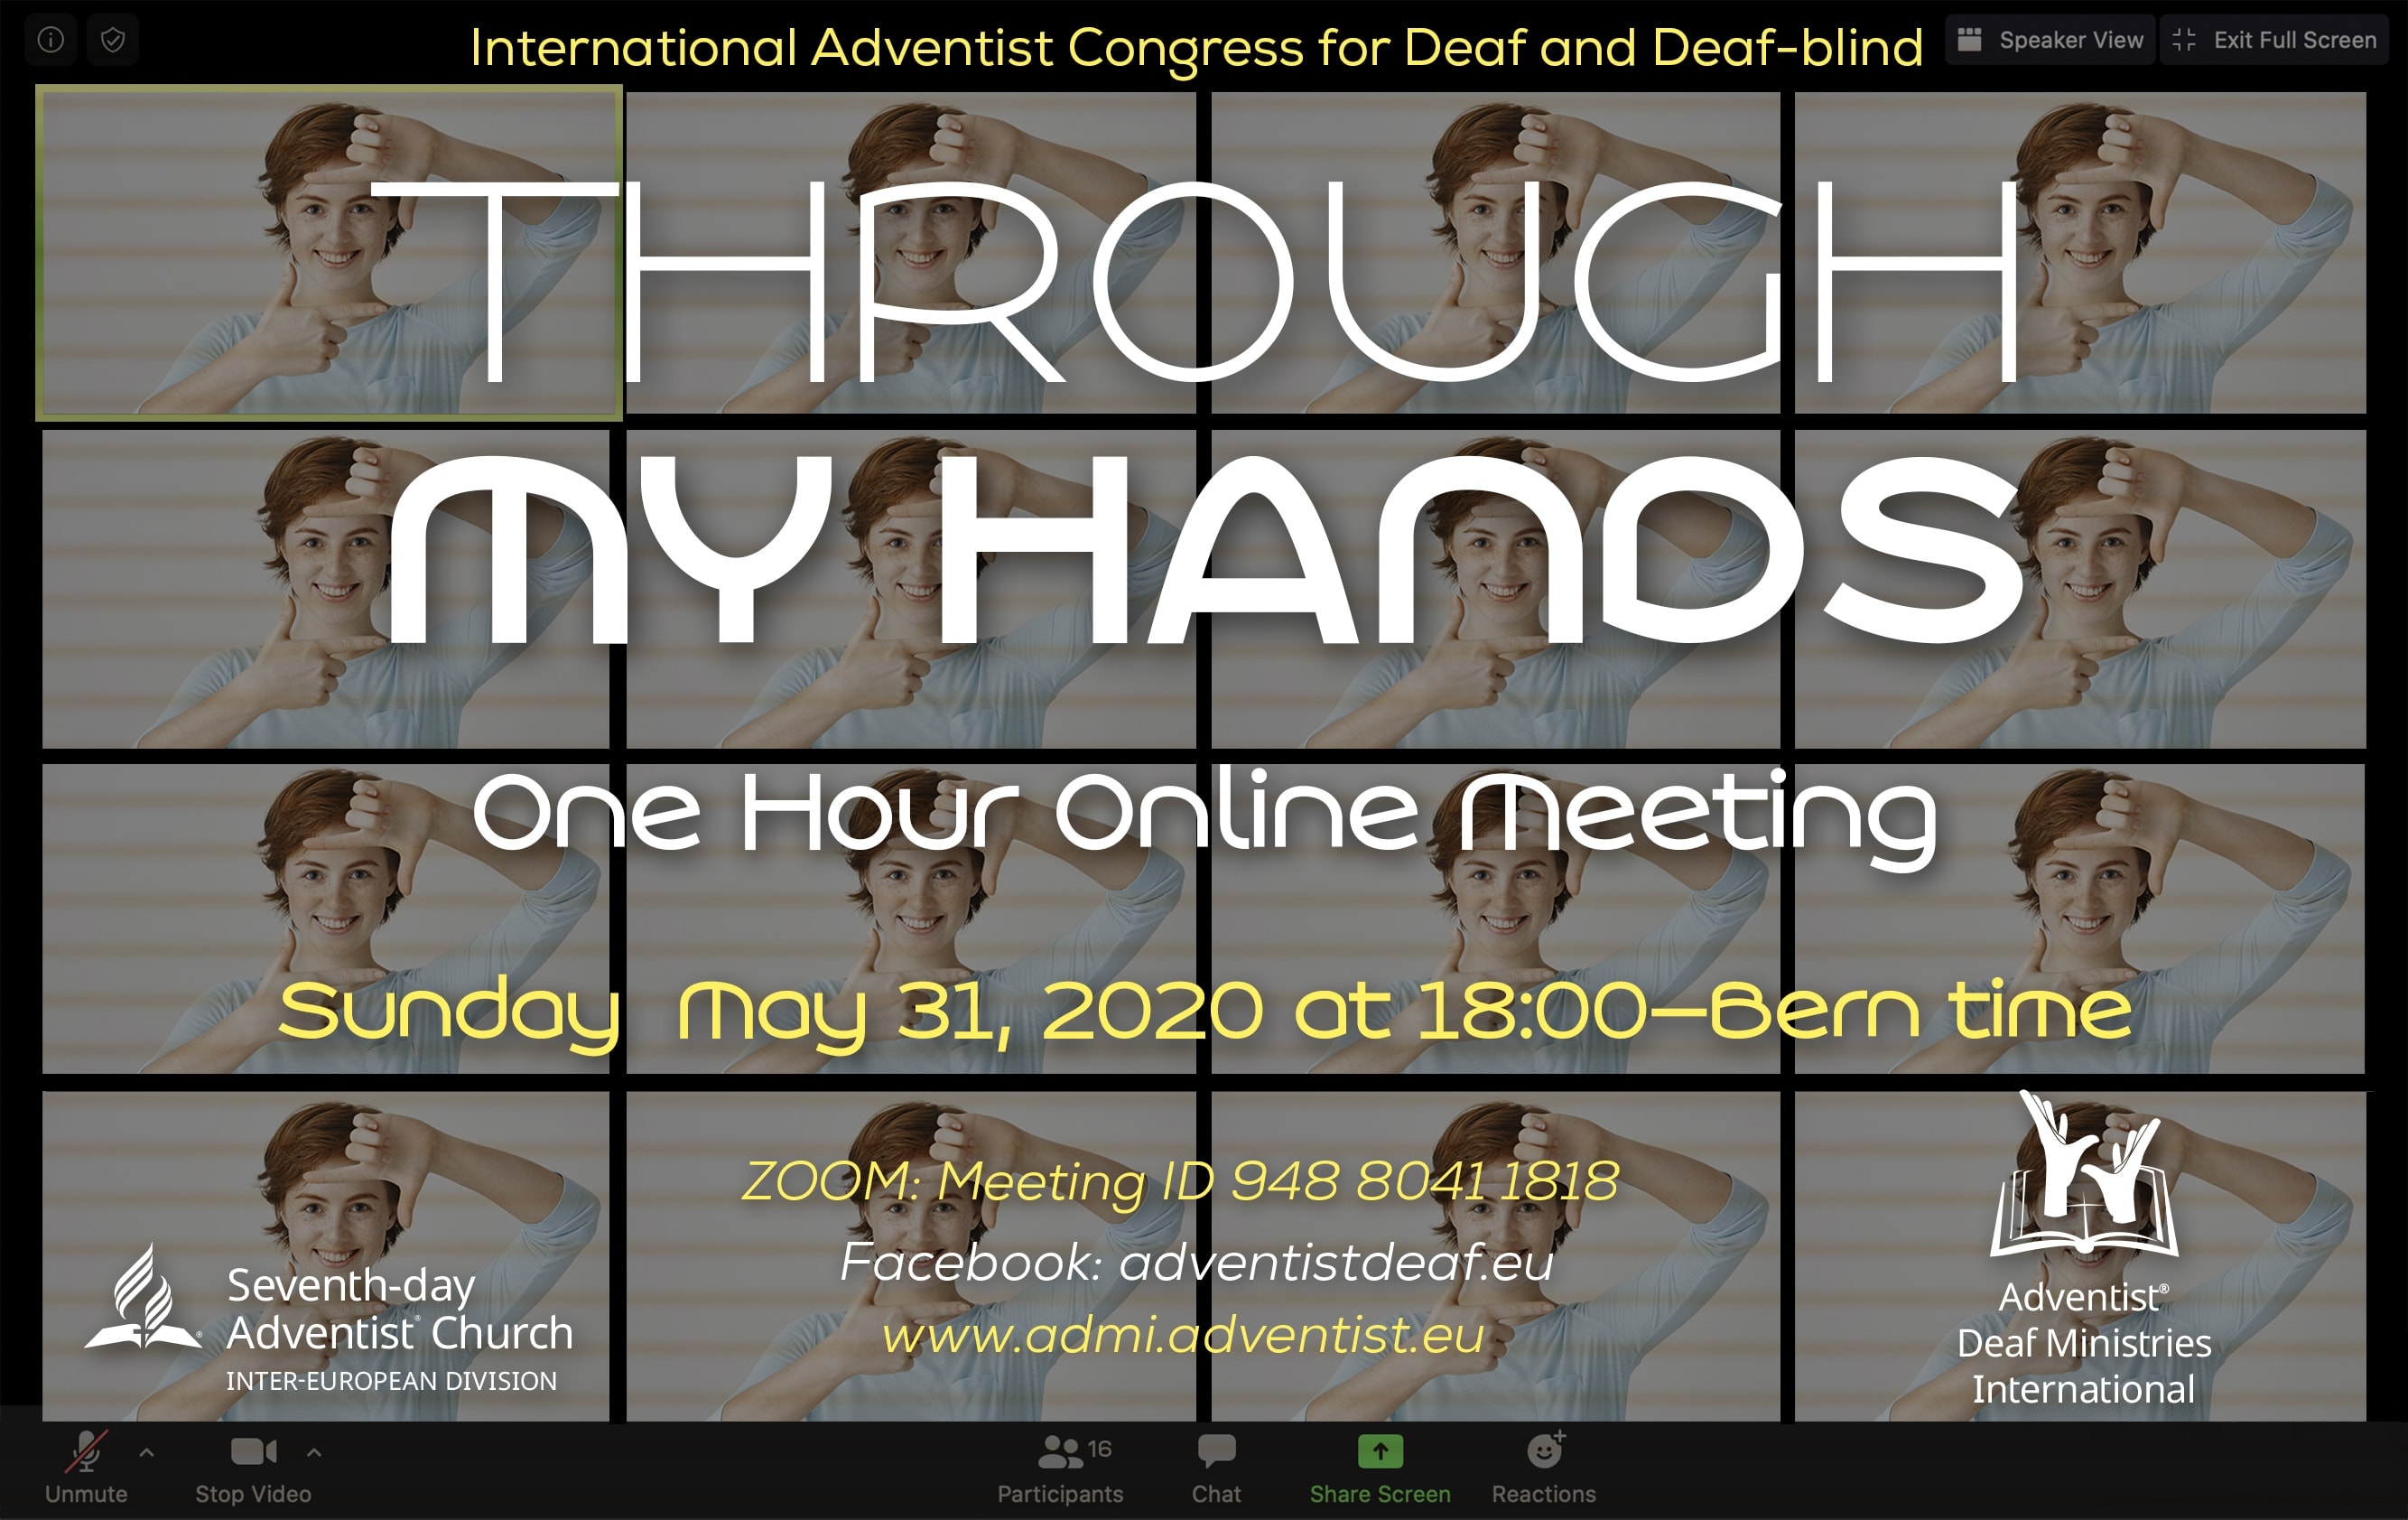 Poster ad for the May 31, 2020 online event for the deaf and deaf-blind, which drew 220 Seventh-day Adventist deaf people together for an hour of sharing. [Photo: Inter-European Division News]